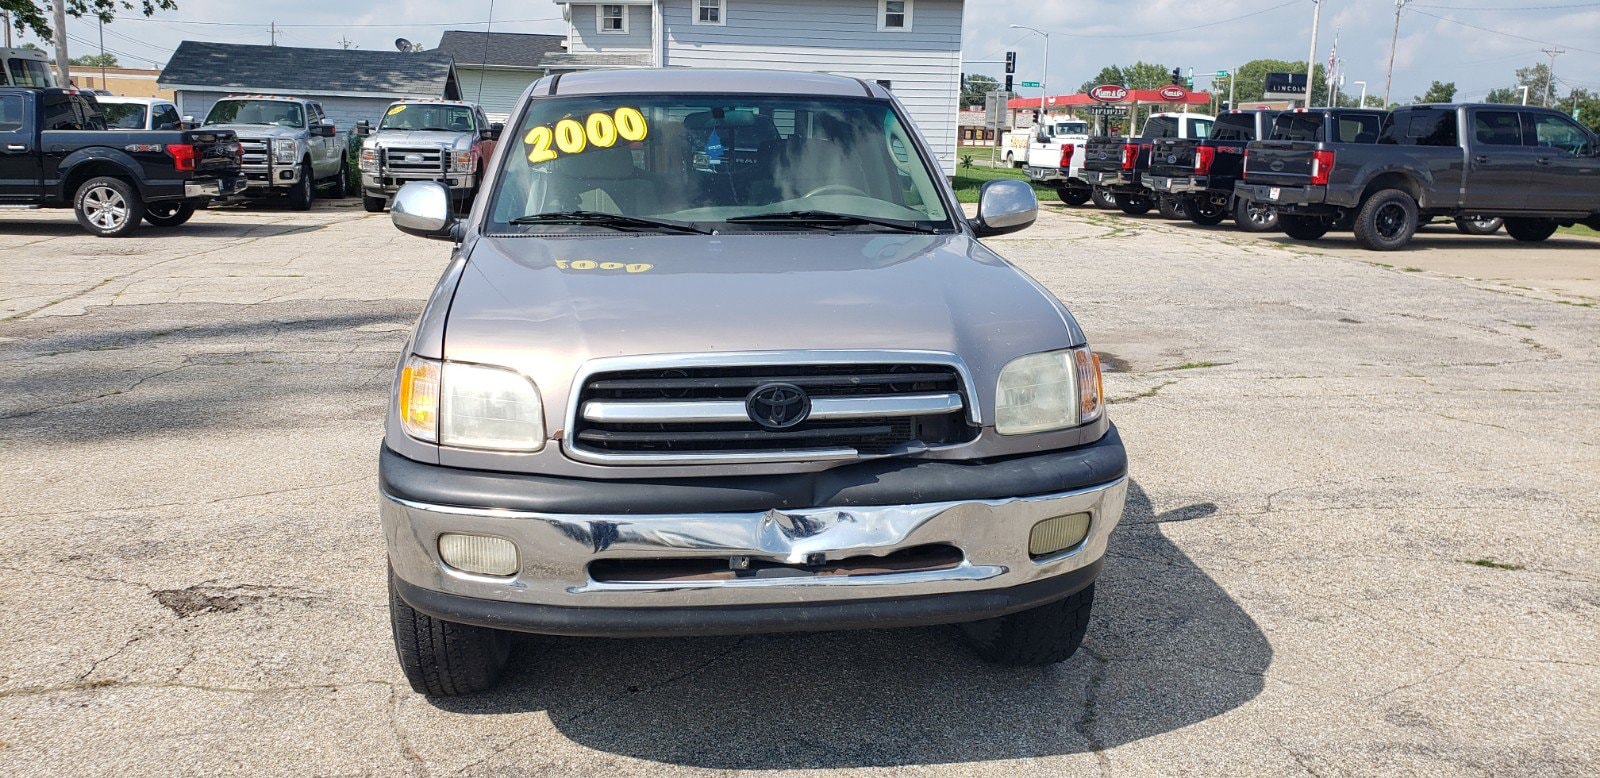 Used 2000 Toyota Tundra SR5 with VIN 5TBBT4415YS002547 for sale in Grinnell, IA